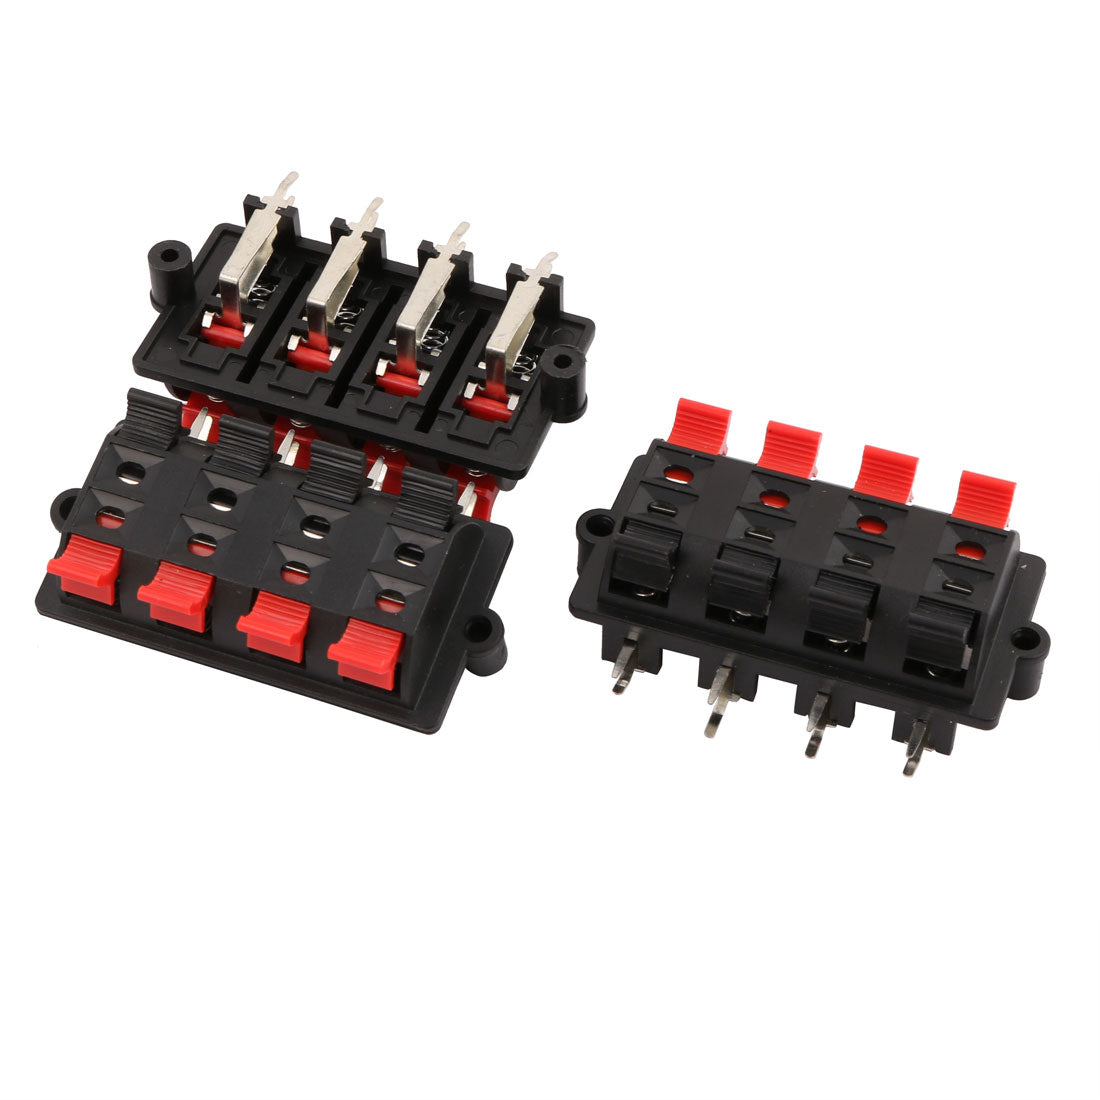 uxcell Uxcell 3Pcs WP8-3 8 Terminal 8 Position Spring Loaded Push Speaker Socket Connector Board